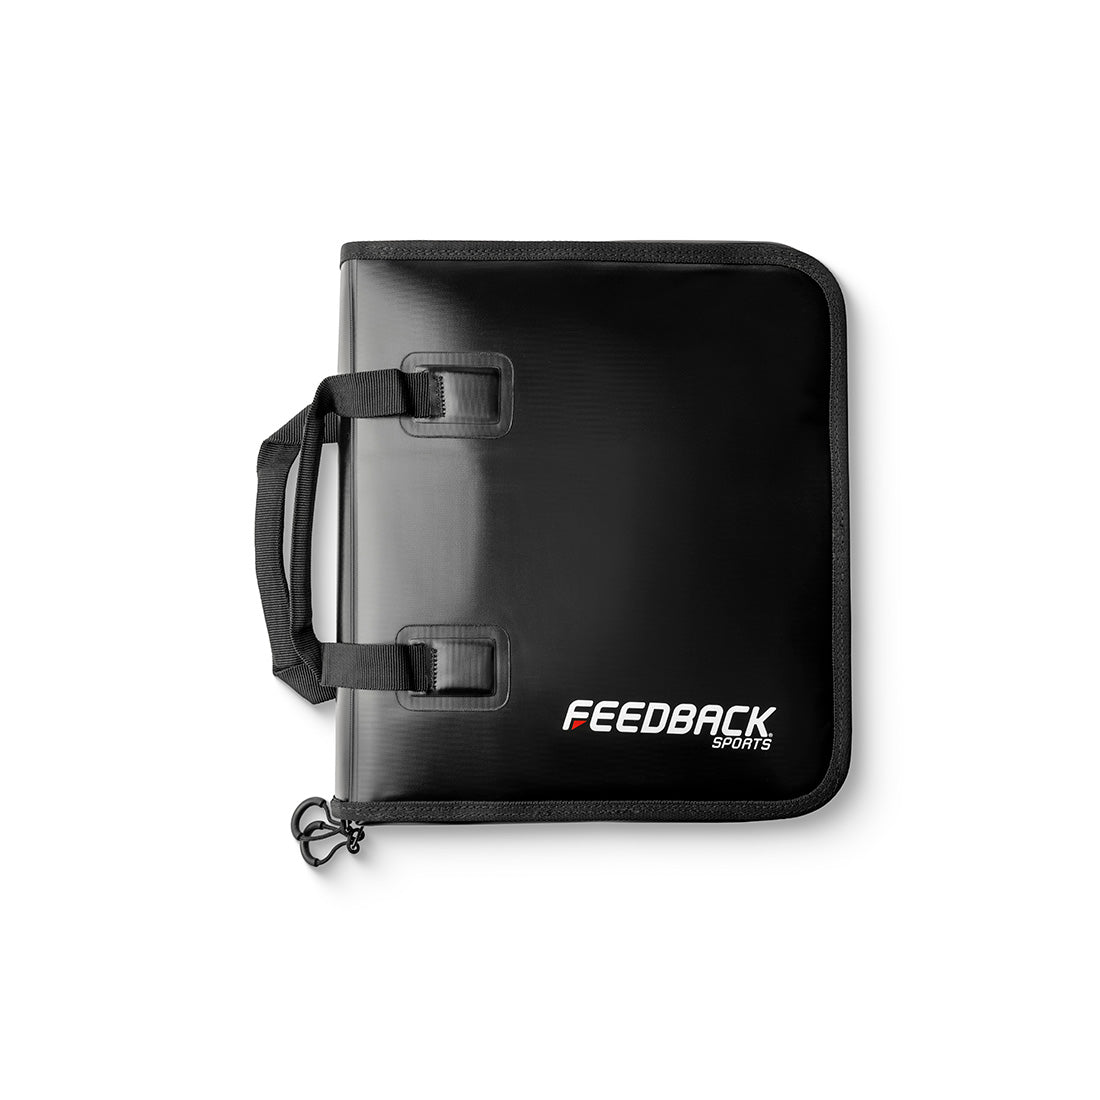 feedback sports team edition toolkit closed up into it's compact travel form